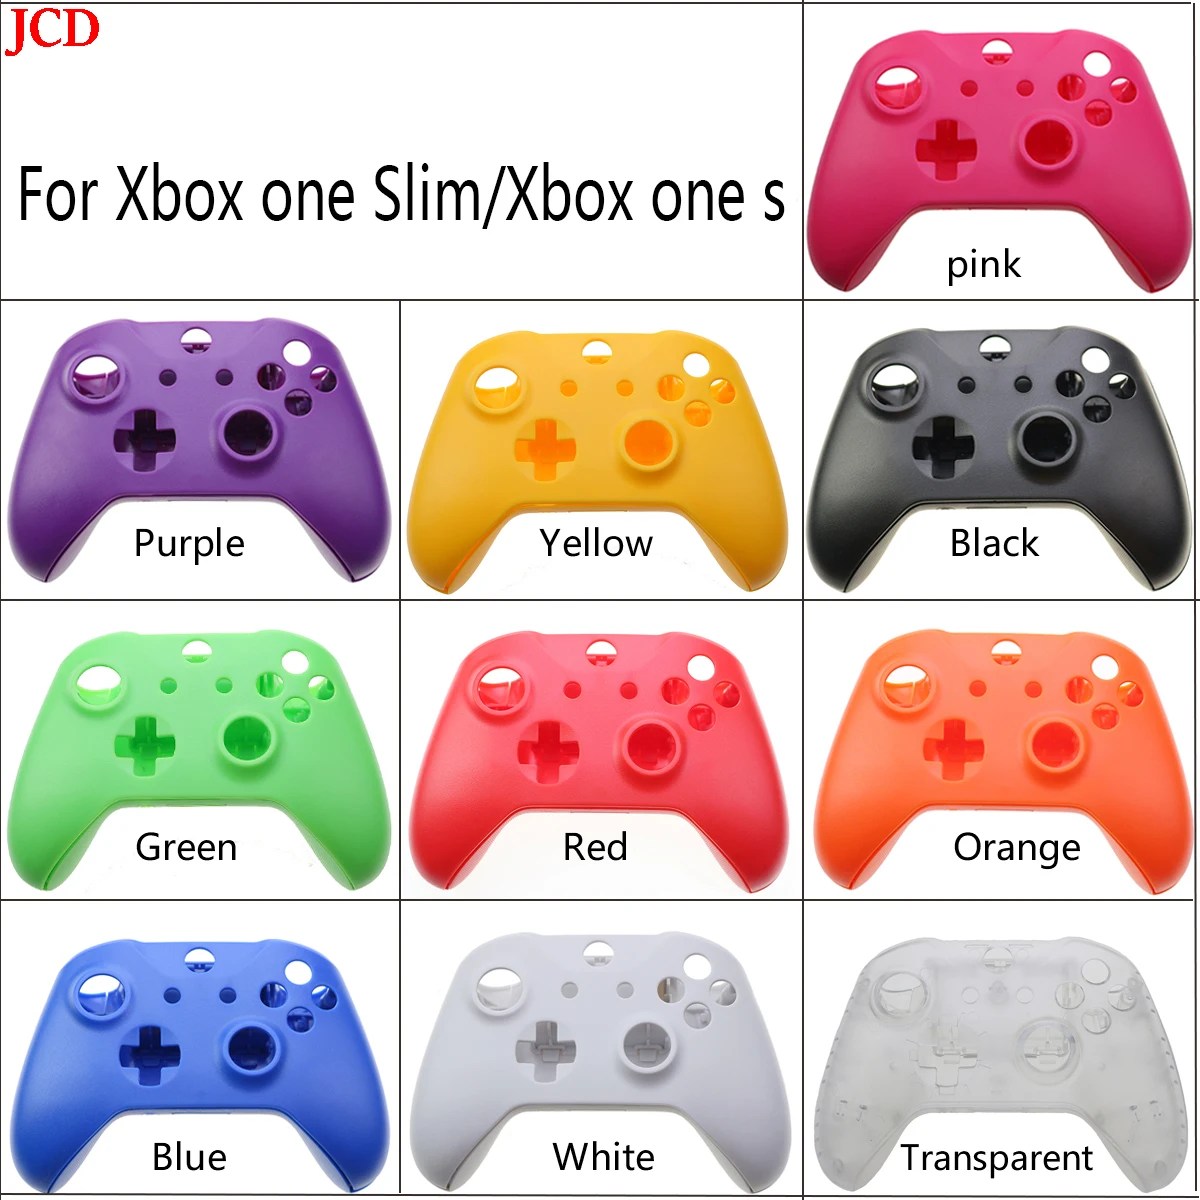 

JCD 1 Pcs Colors Fashion Front Top Handle Housing Shell Faceplate Case Cover For XBox One Slim XBOXONE S Controller